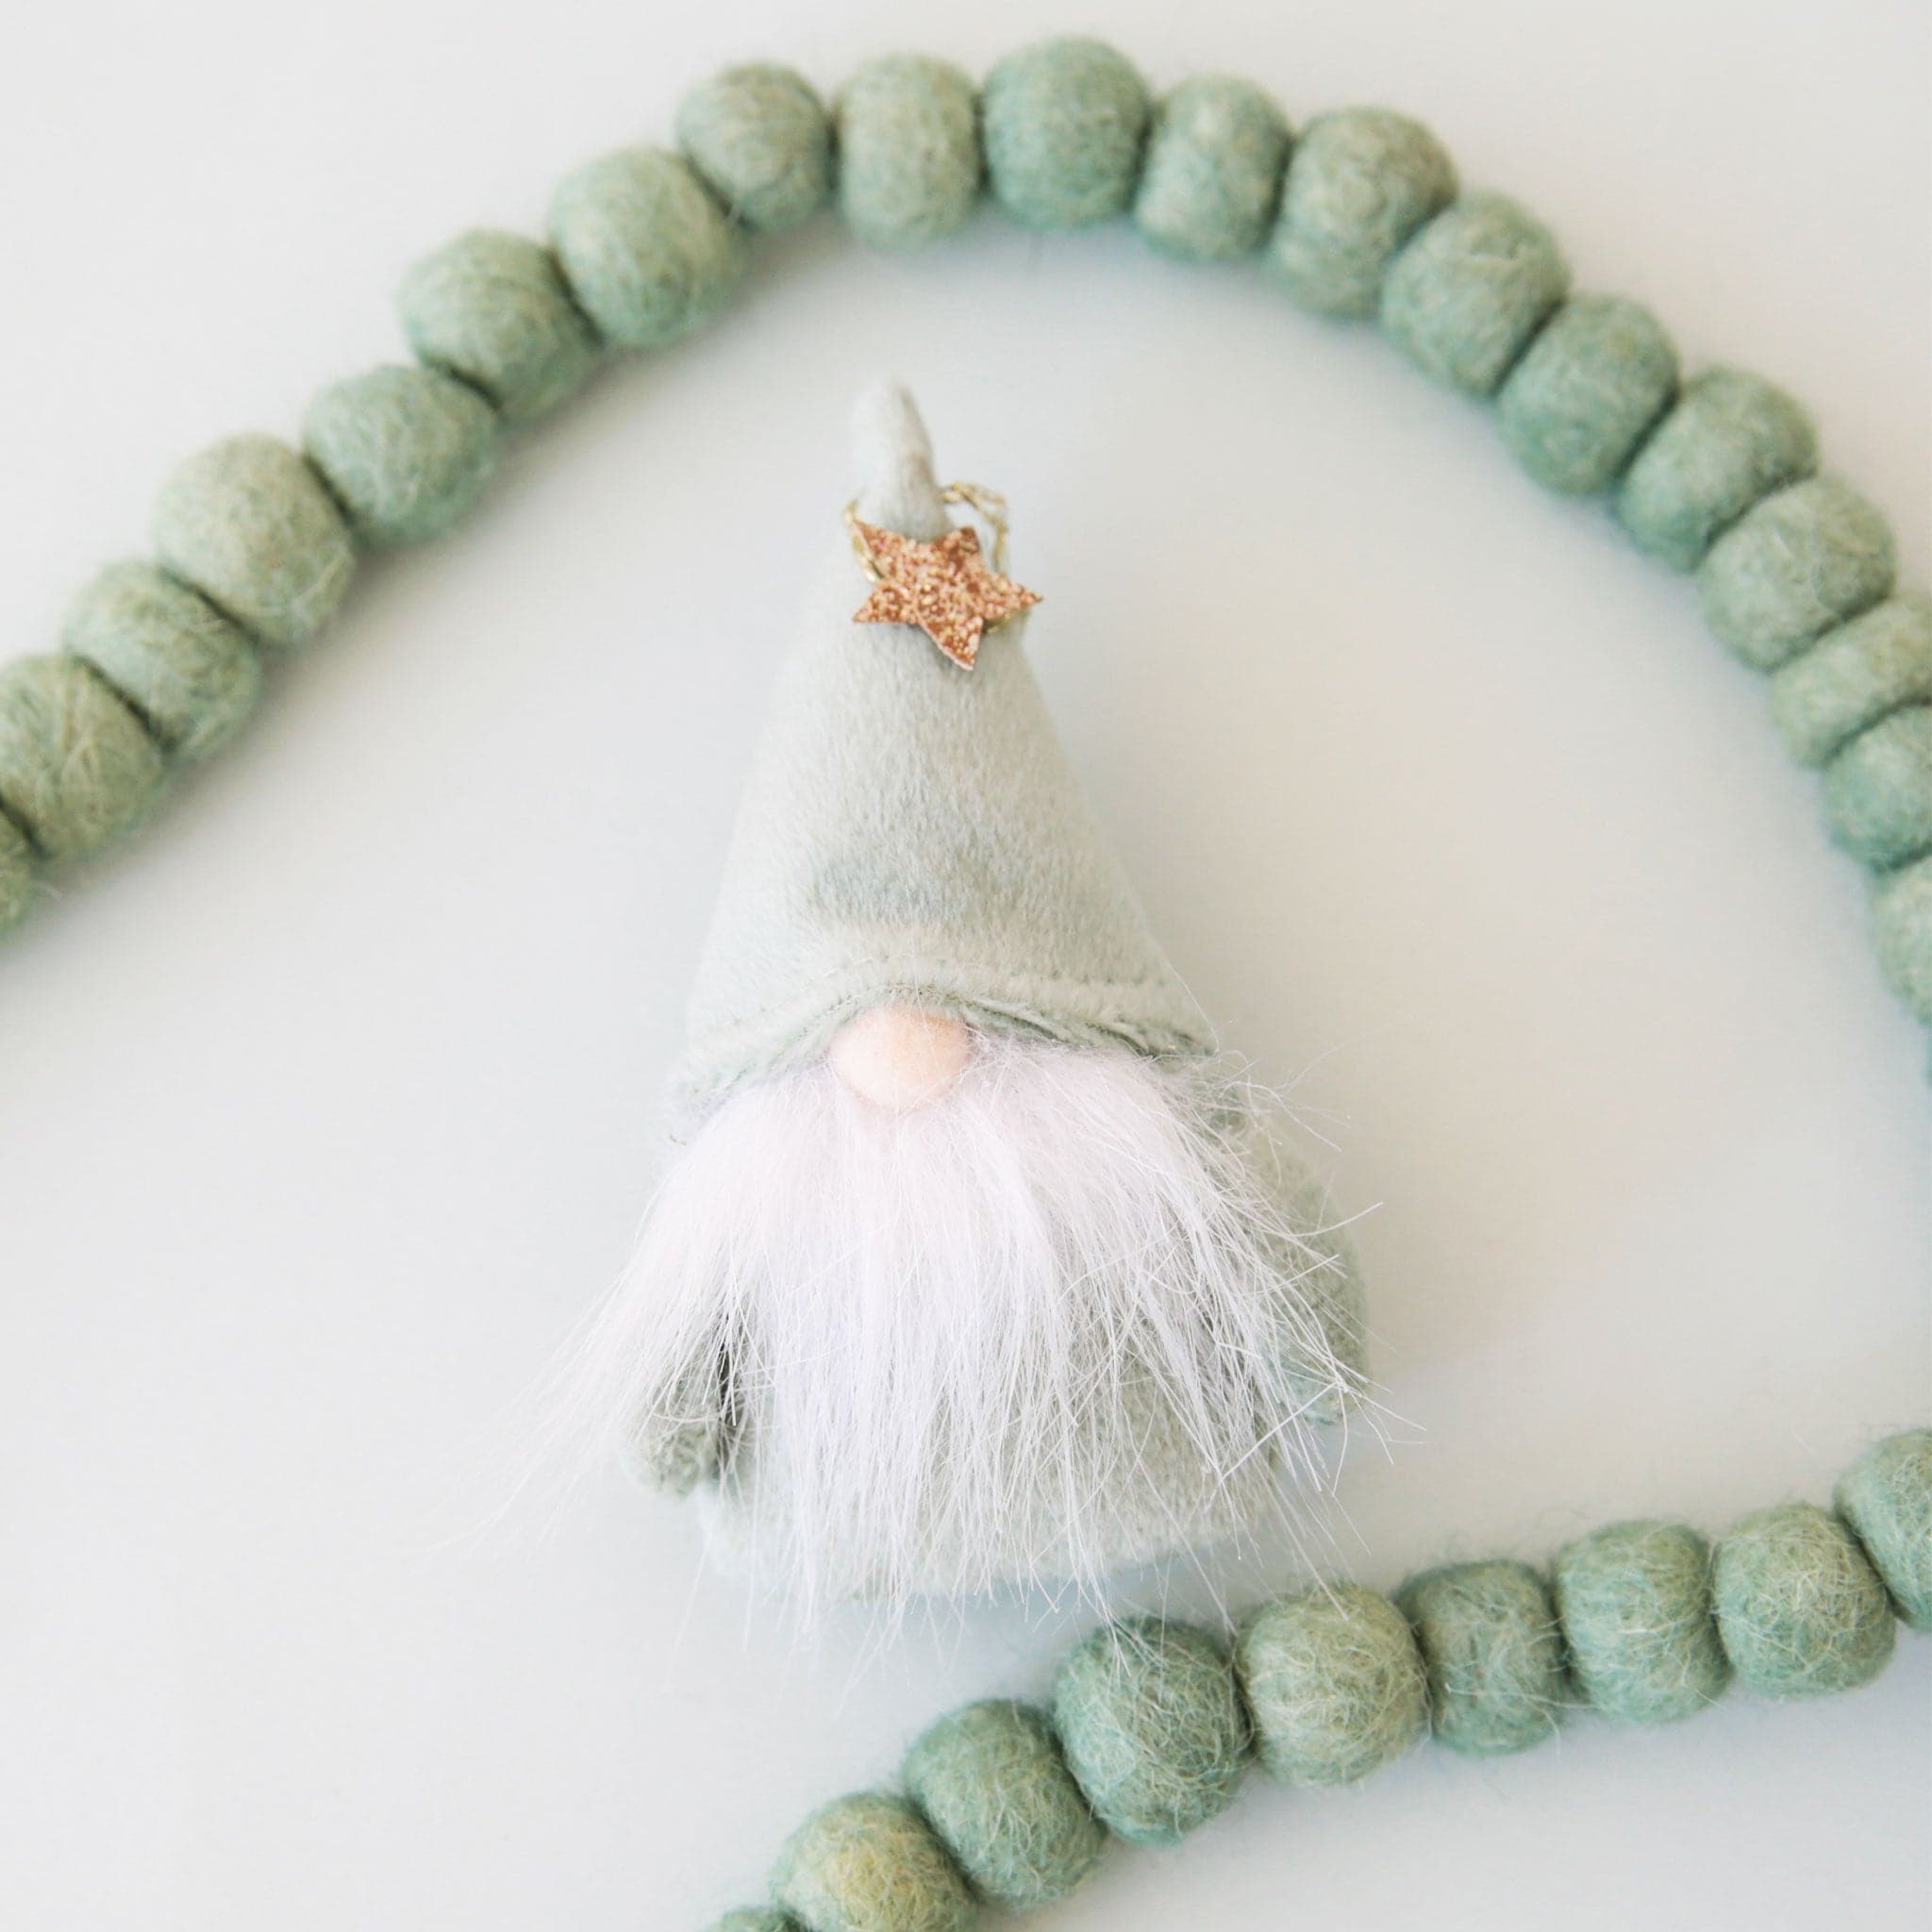 A plush mint green gnome ornament with a gold star and beard on a neutral ground.